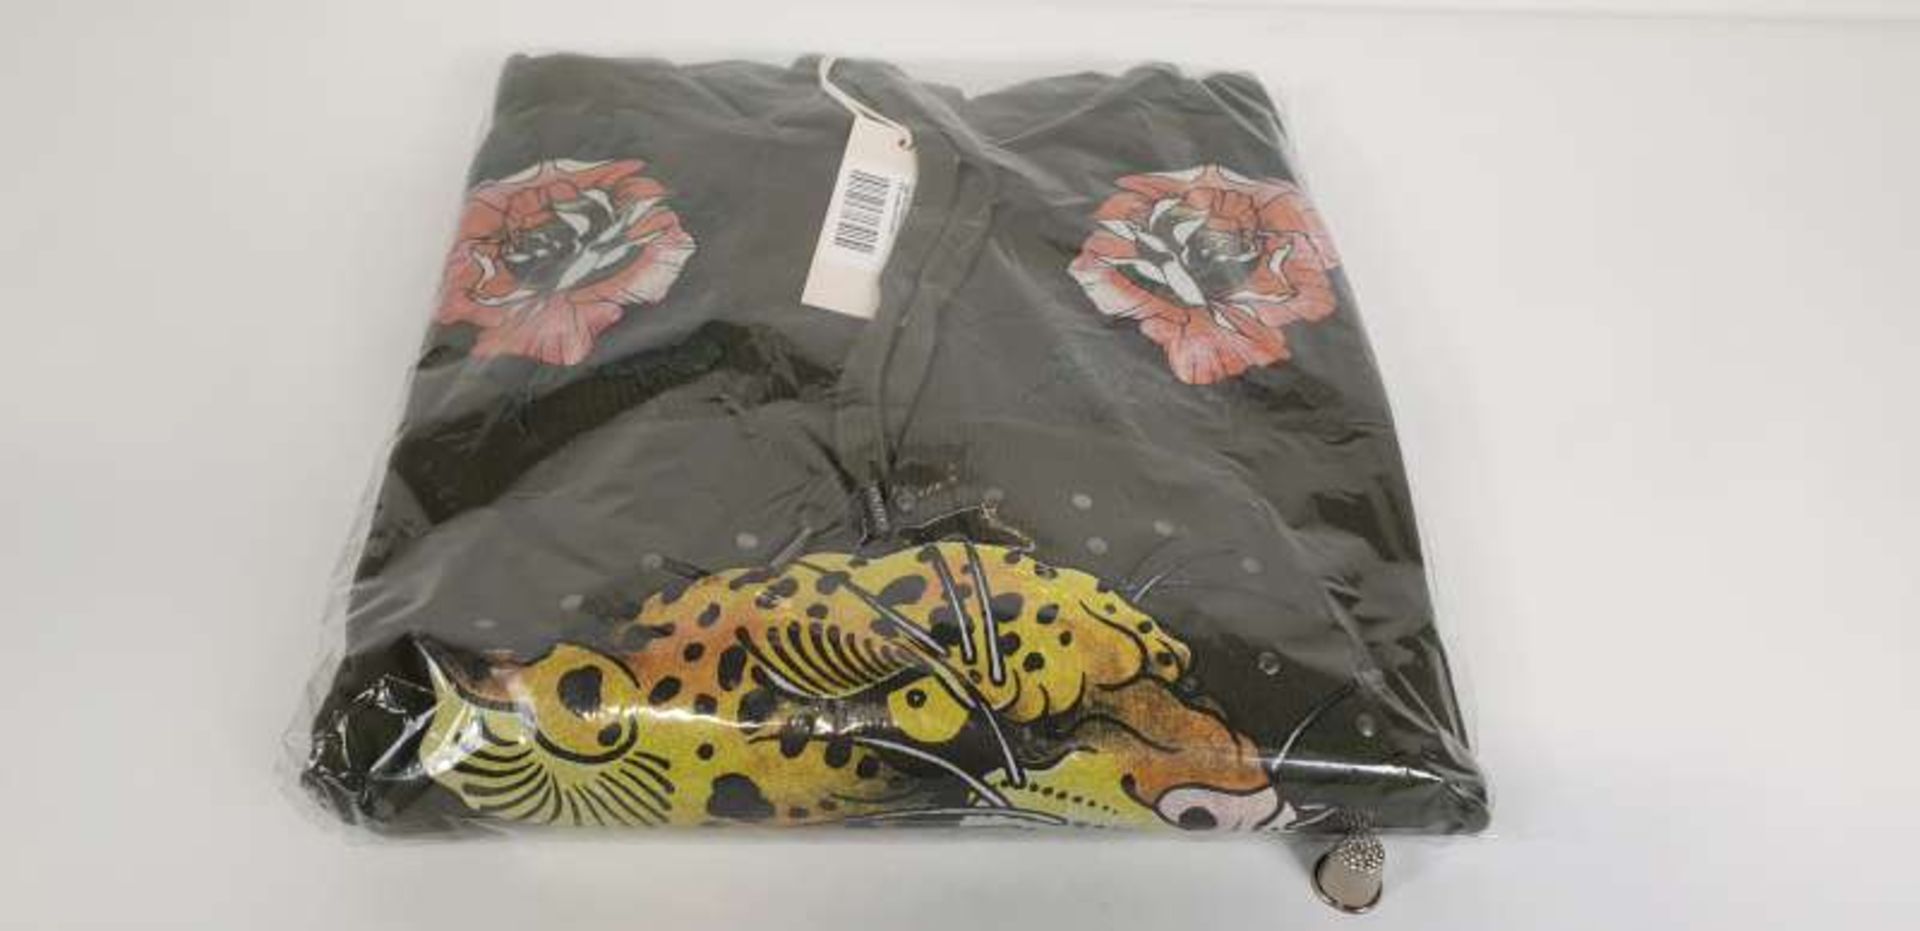 10 X BRAND NEW ILLEGAL CLUB PARIS HOODED TOPS WITH TIGER DETAIL IN VARIOUS SIZES